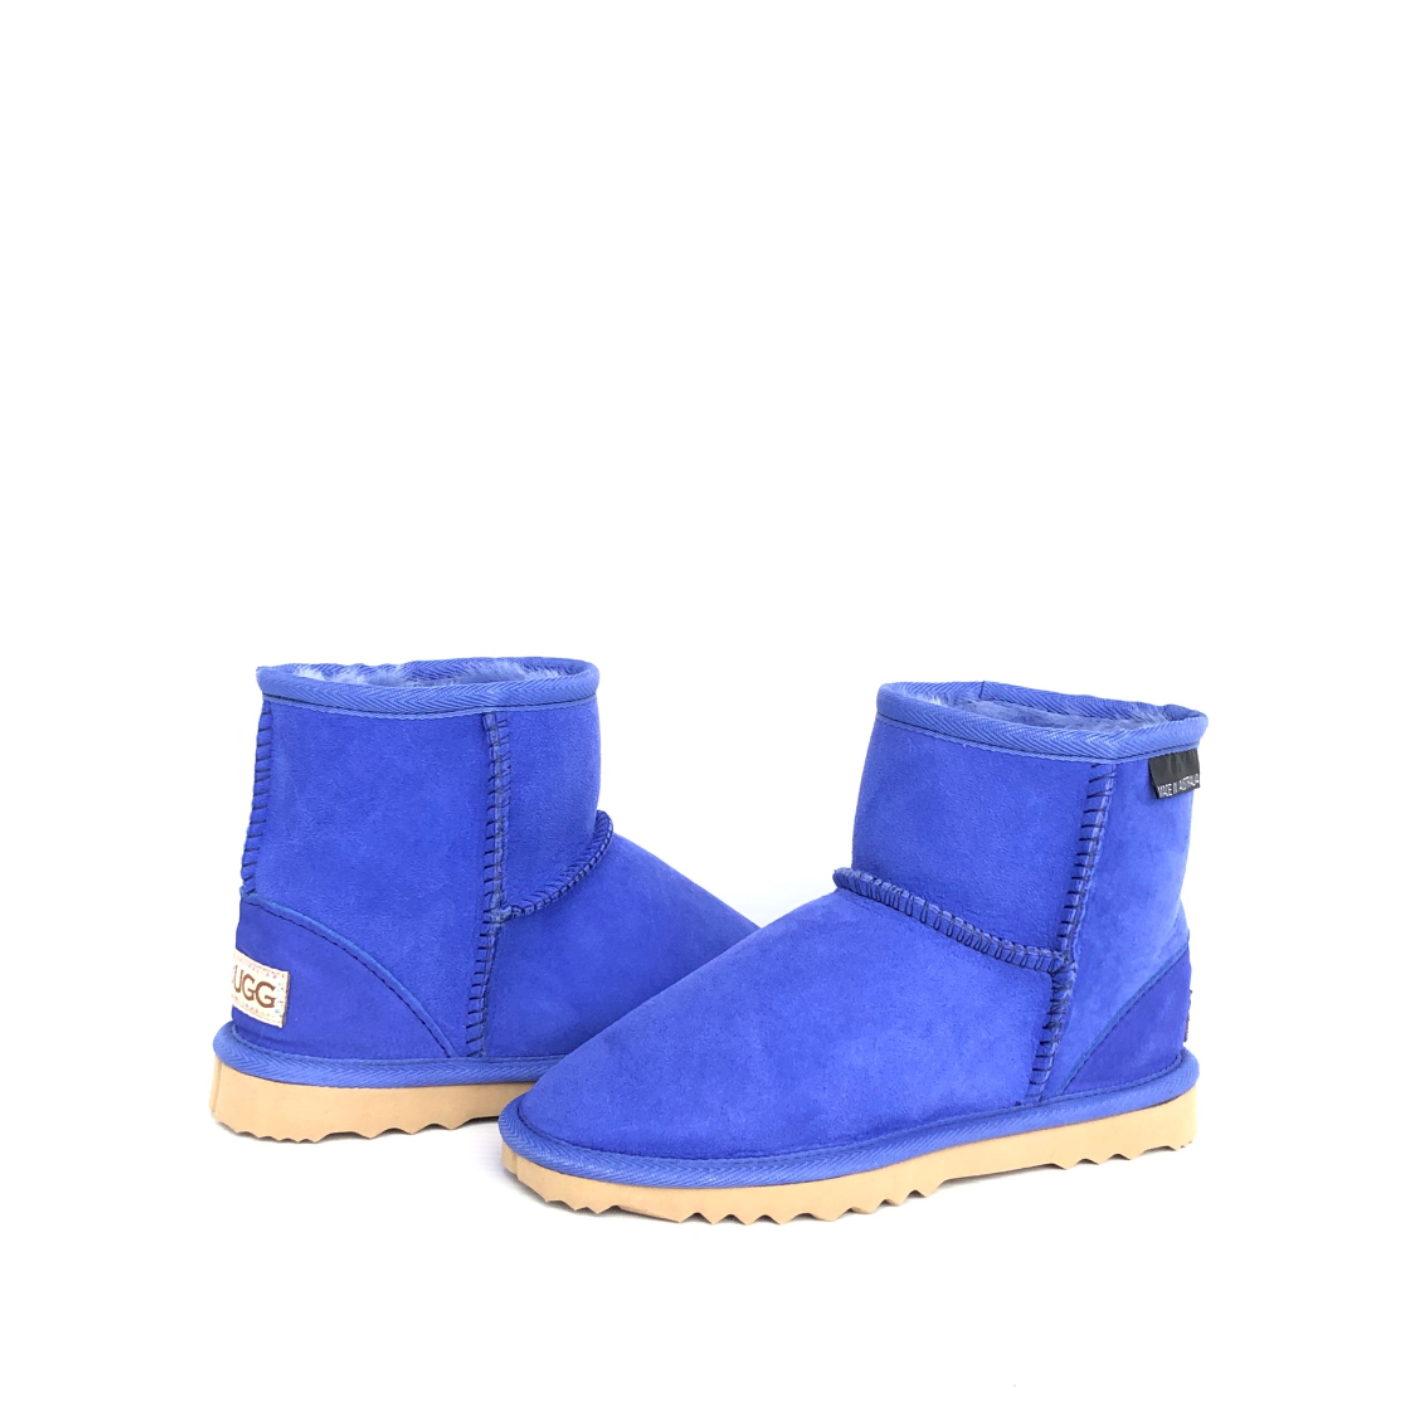 Kid's ultra short boots in electric blue colour